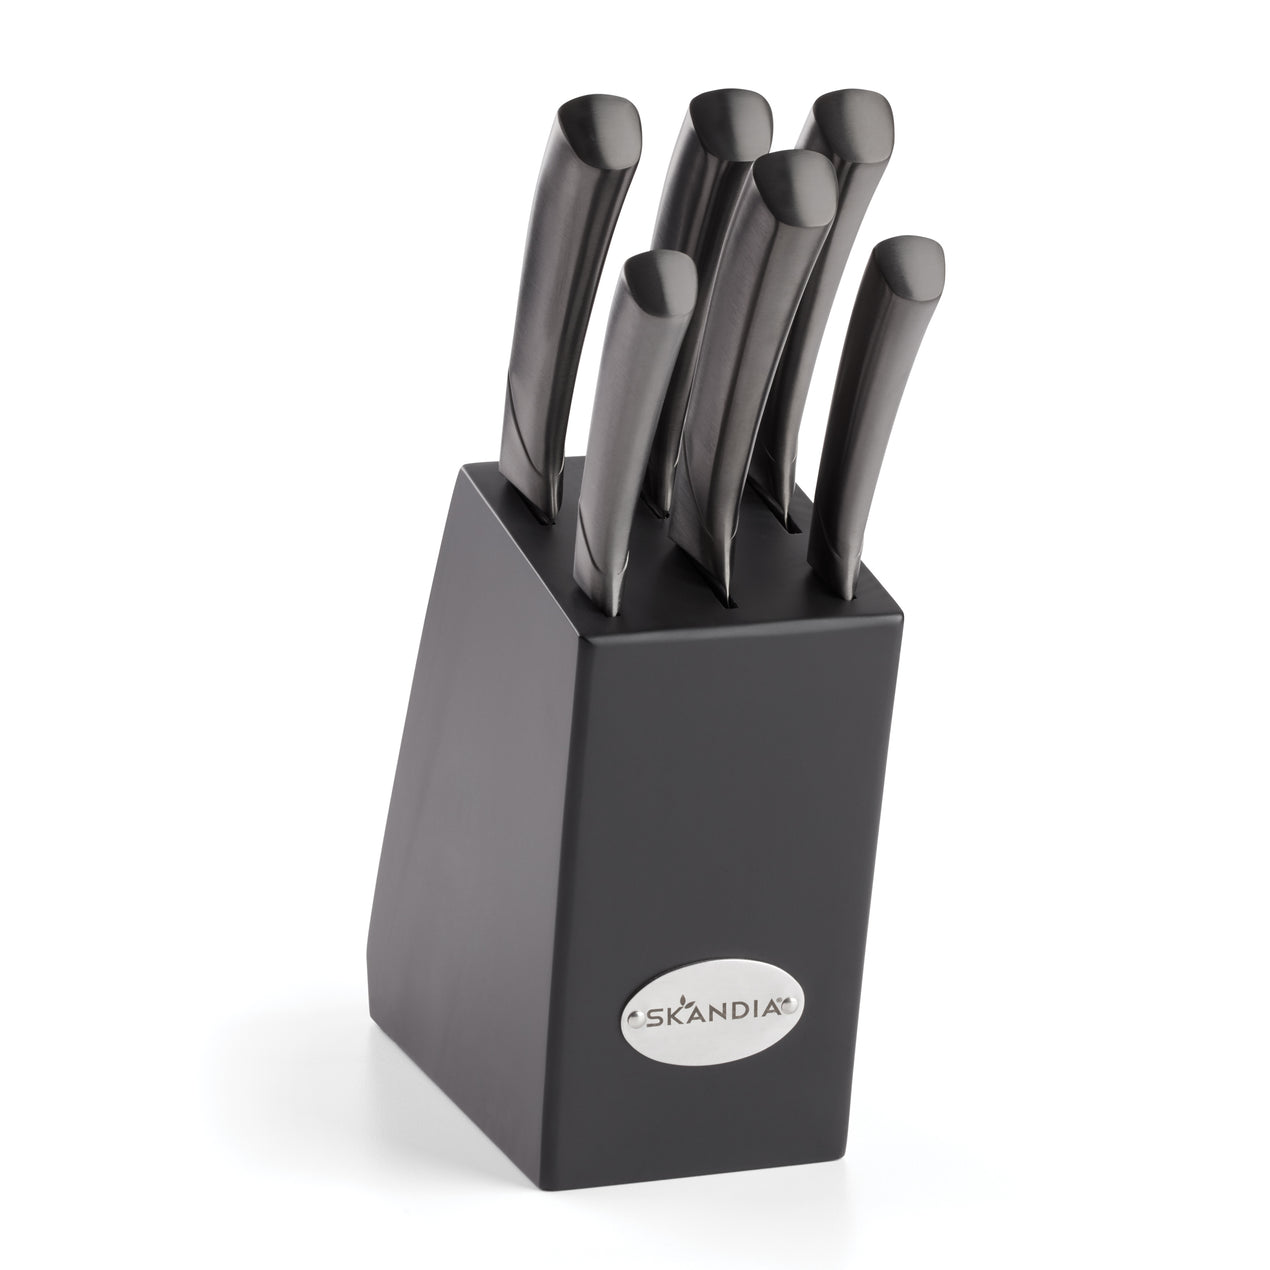 NEW: Skandia 5-piece Stainless Steel Cutlery Set with Blade Guards